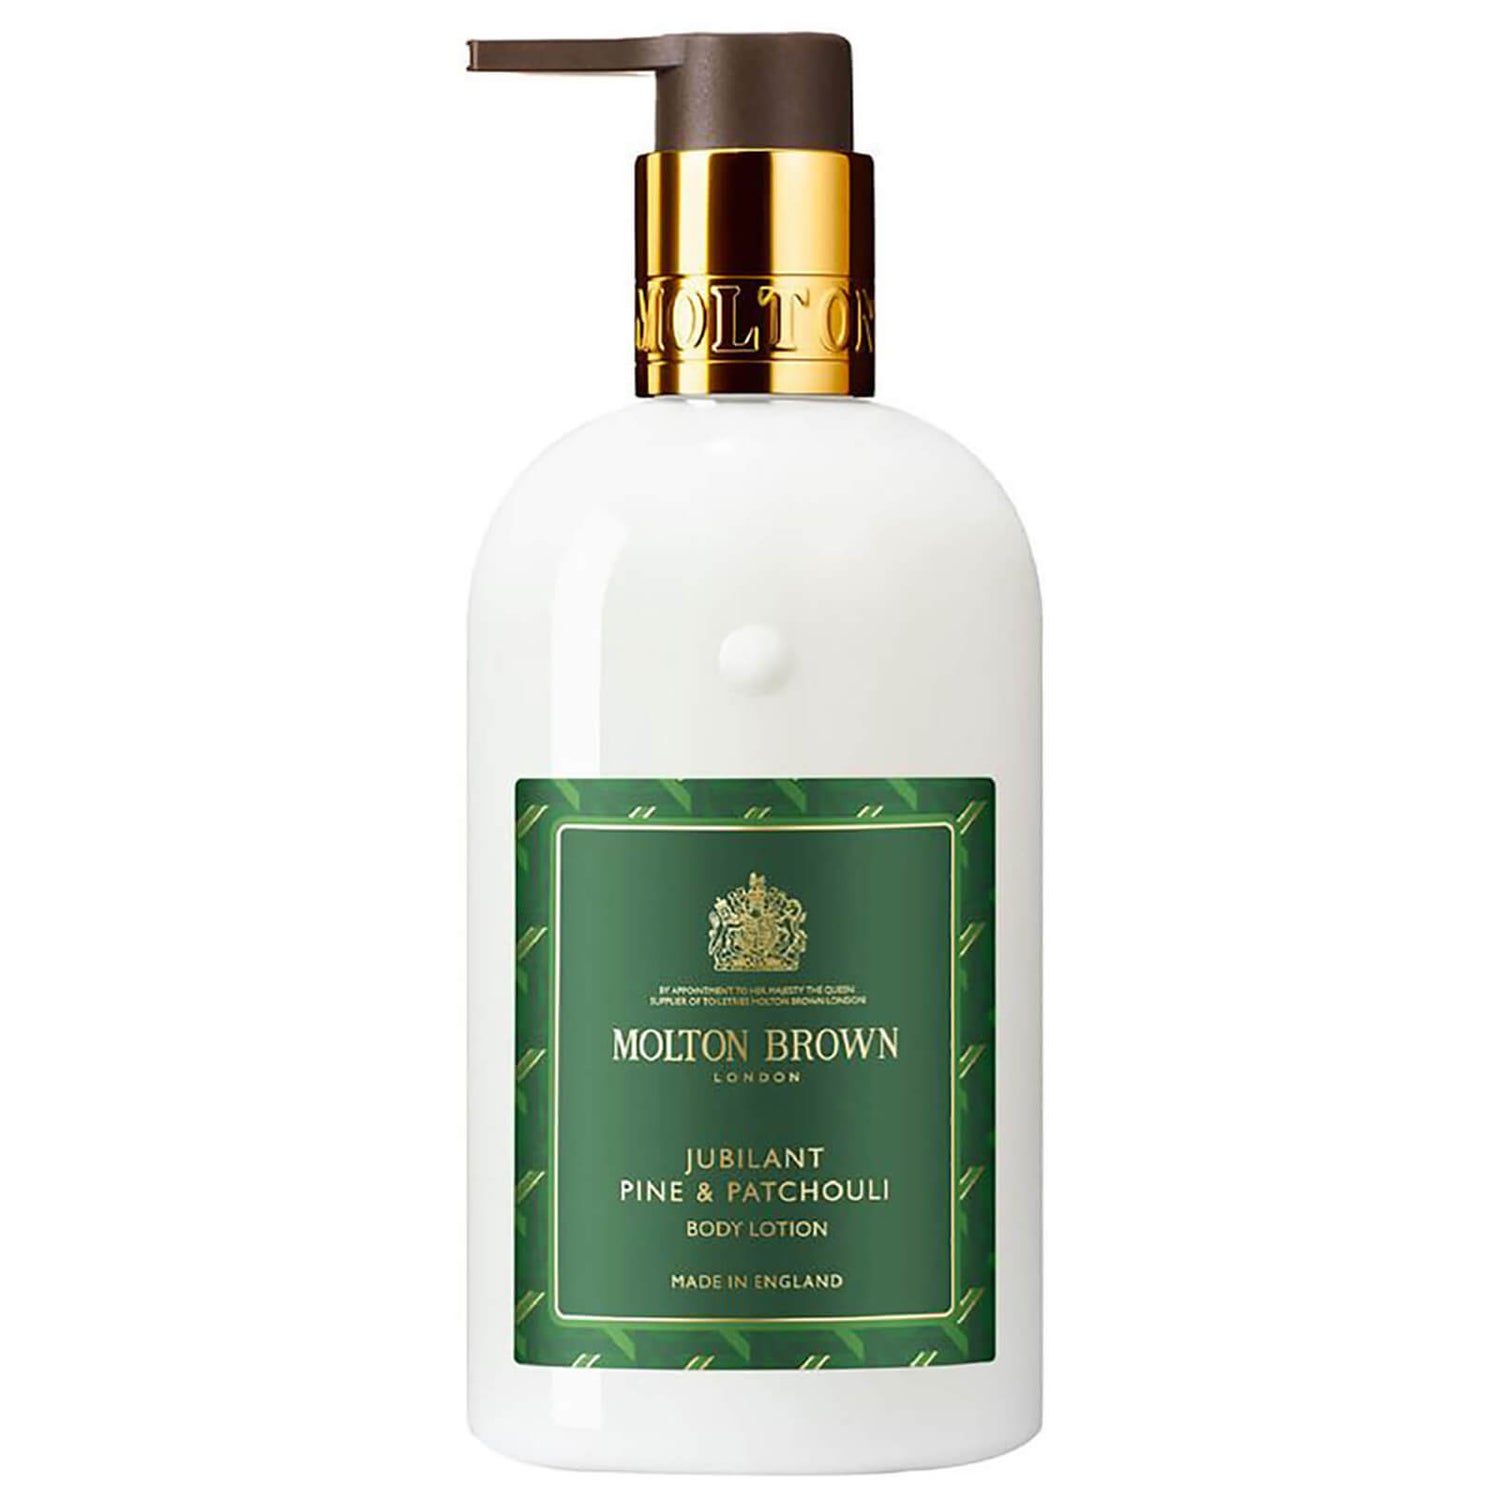 Molton Brown Jubilant Pine and Patchouli Body Lotion 300ml